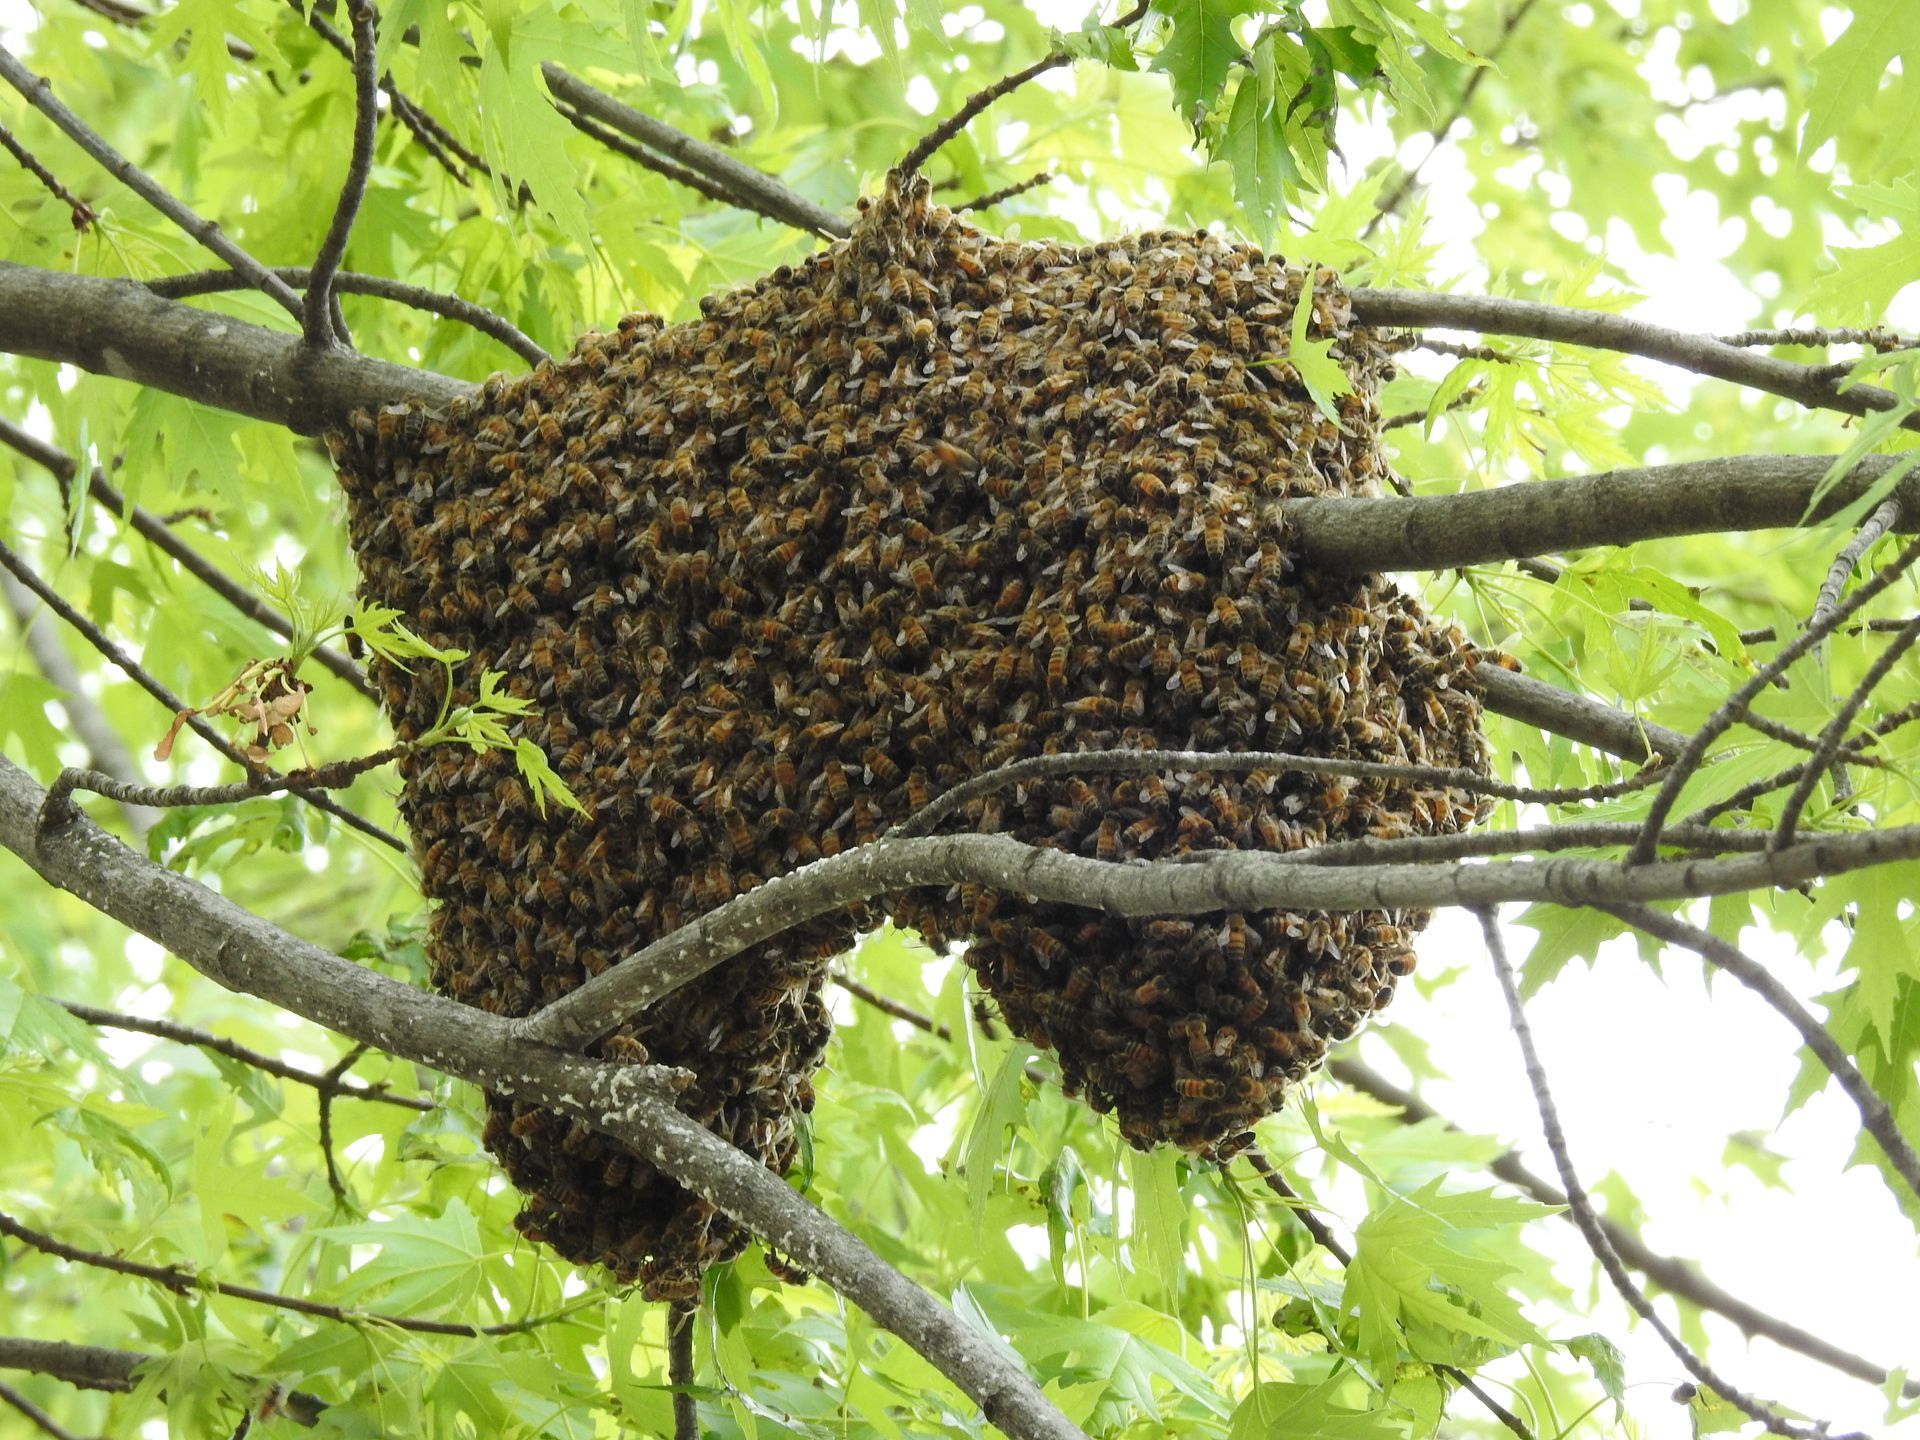 wasp nest removal services near me